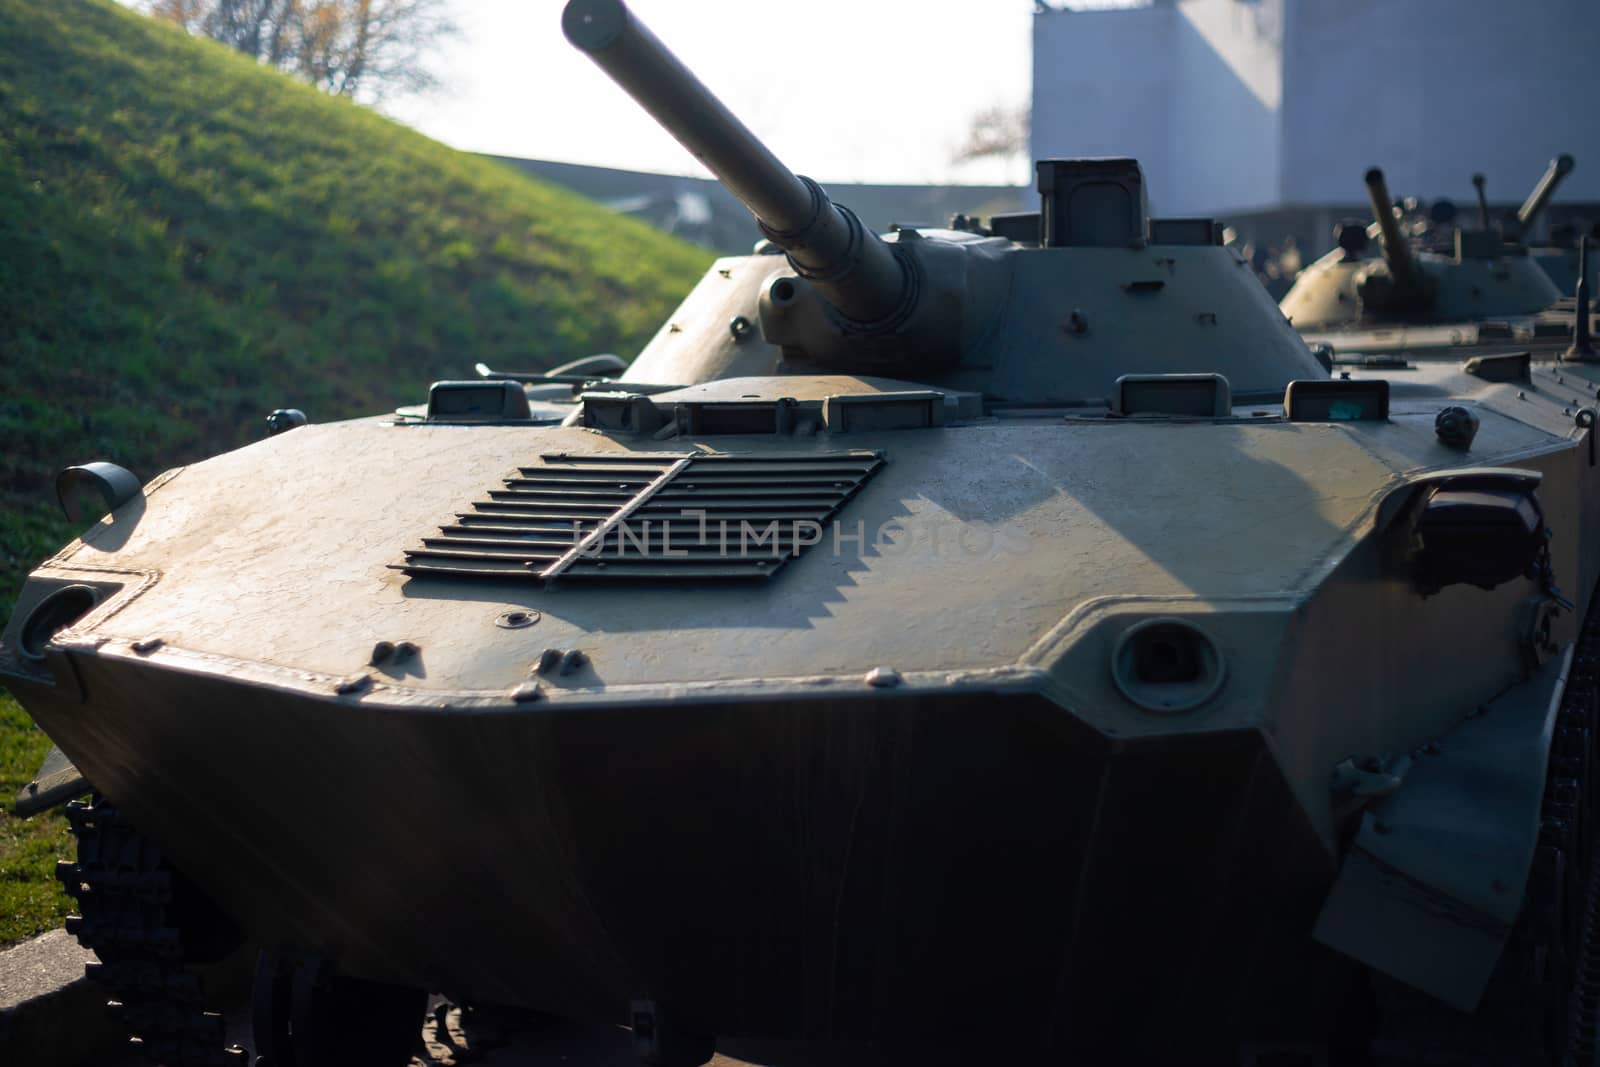 Parts of the hull of the armored infantry vehicle. In front and back of vehicle stays many different armored military vehicles. Military equipment outdoor open air museum.